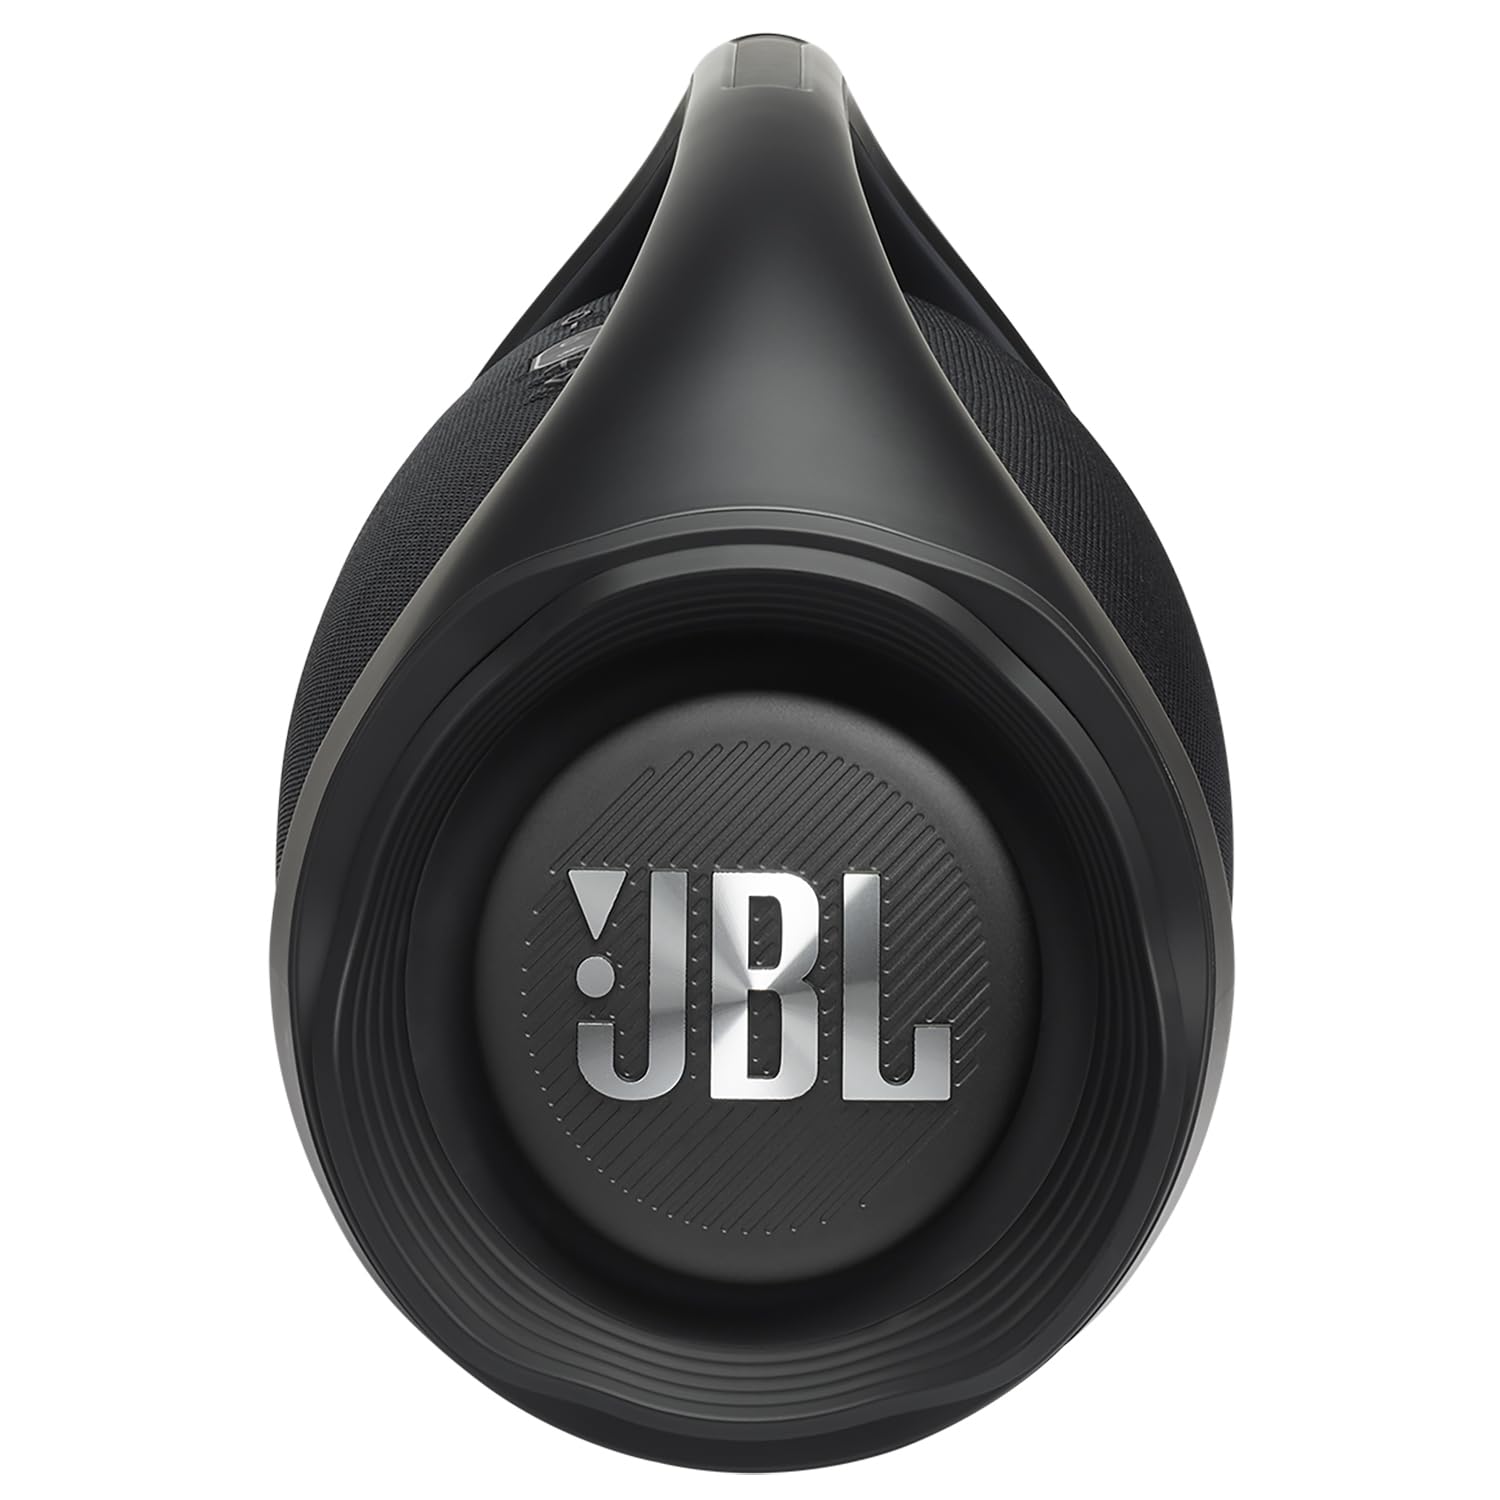 JBL Boombox 2 Portable Bluetooth Speaker, Black - IP67 Dustproof and Waterproof, up to 24 Hours of Nonstop Playback - WEPGPY Cable